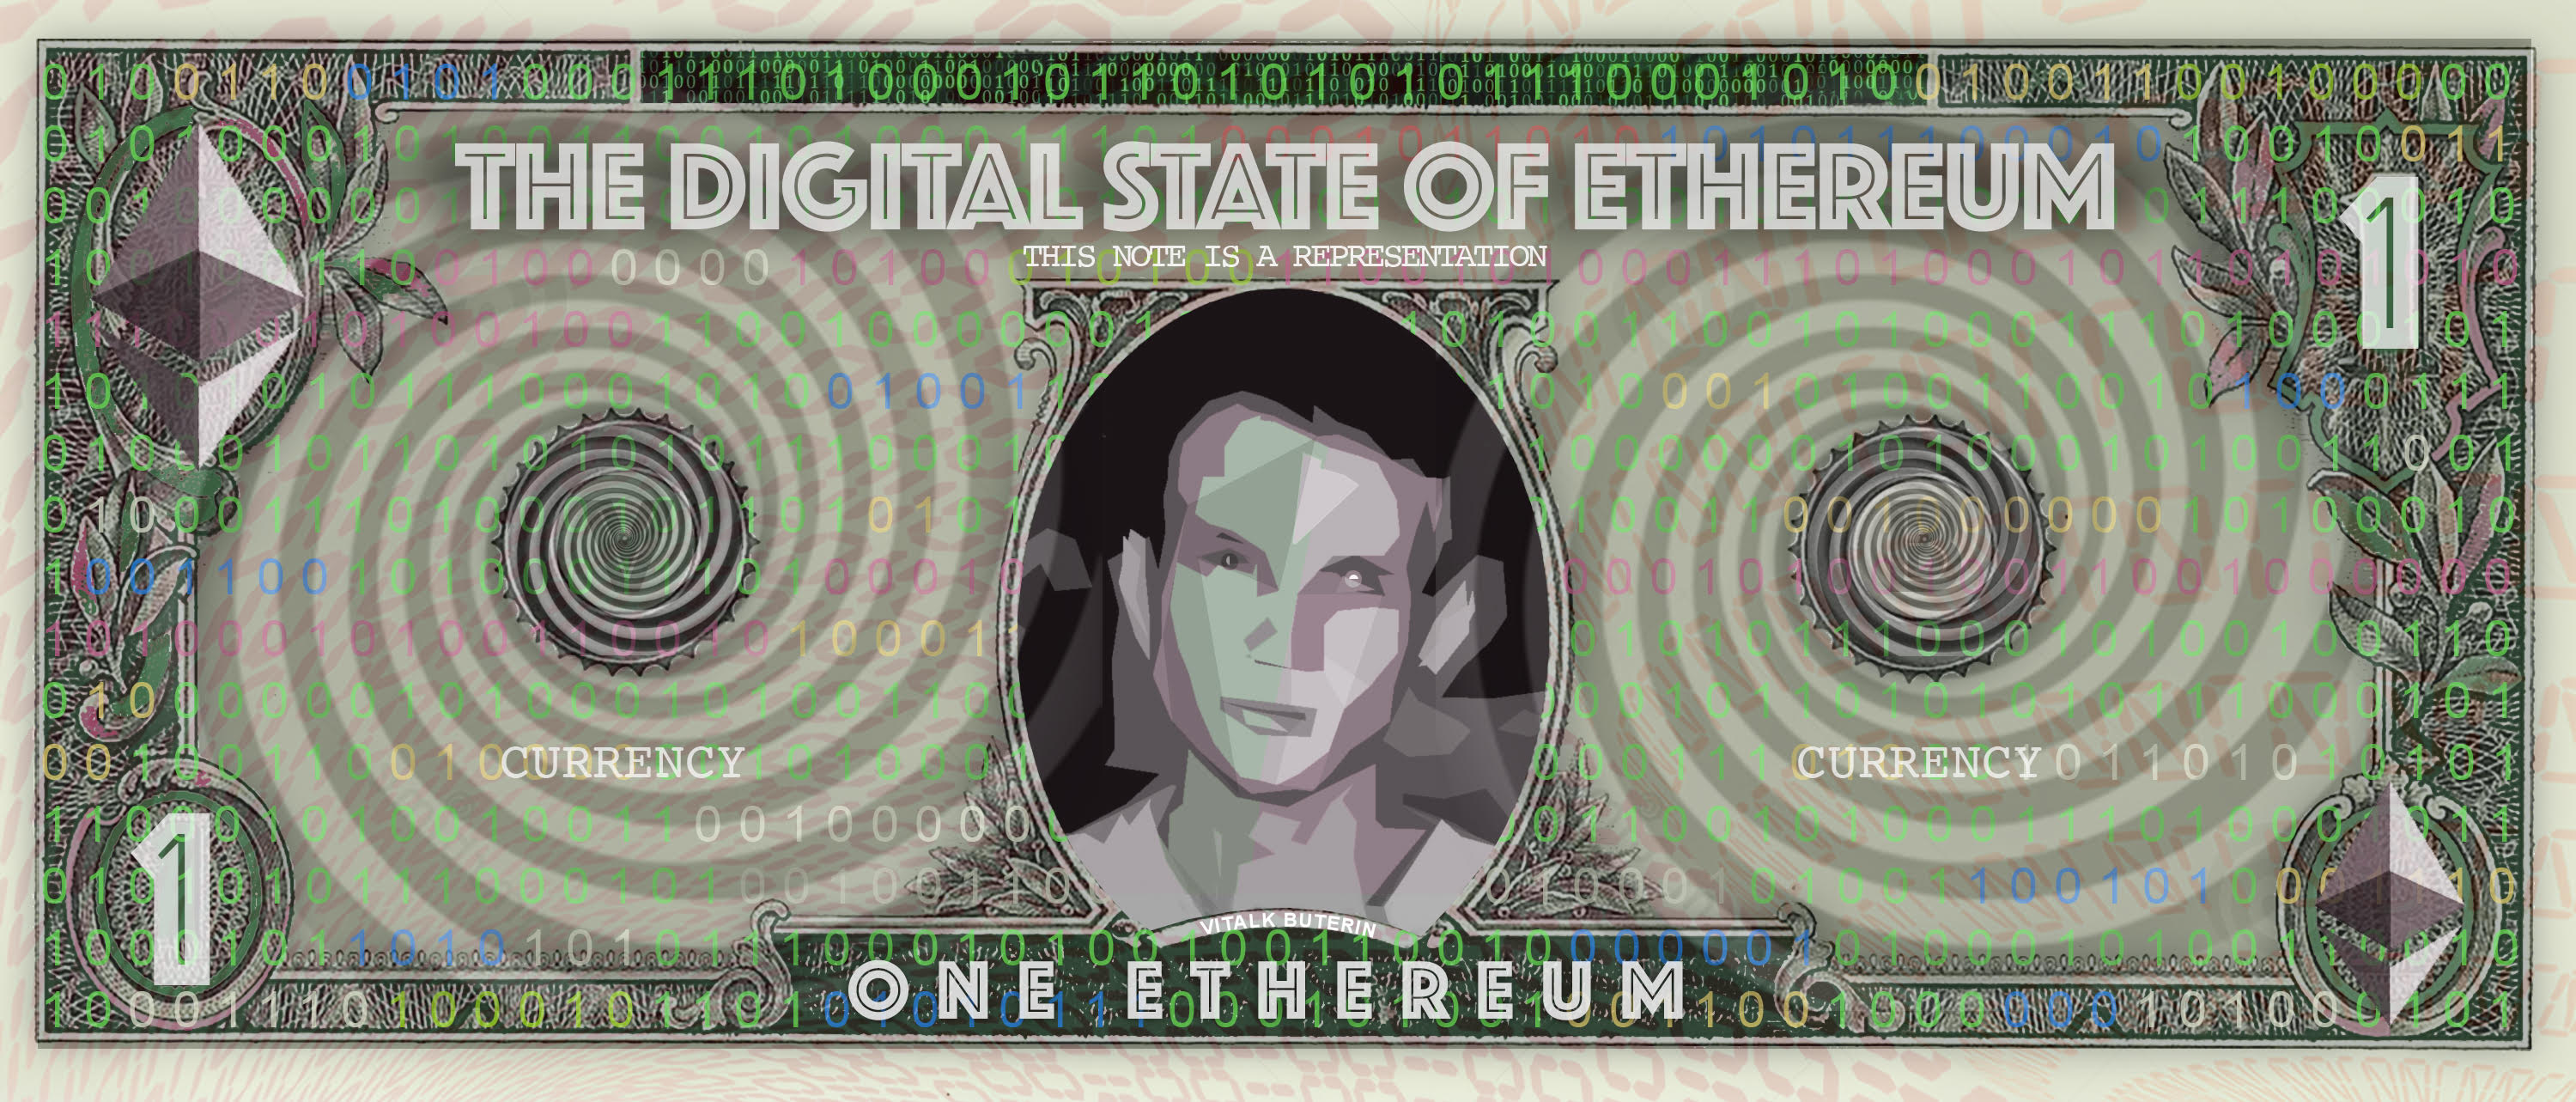 Currency: 1.00 Ether